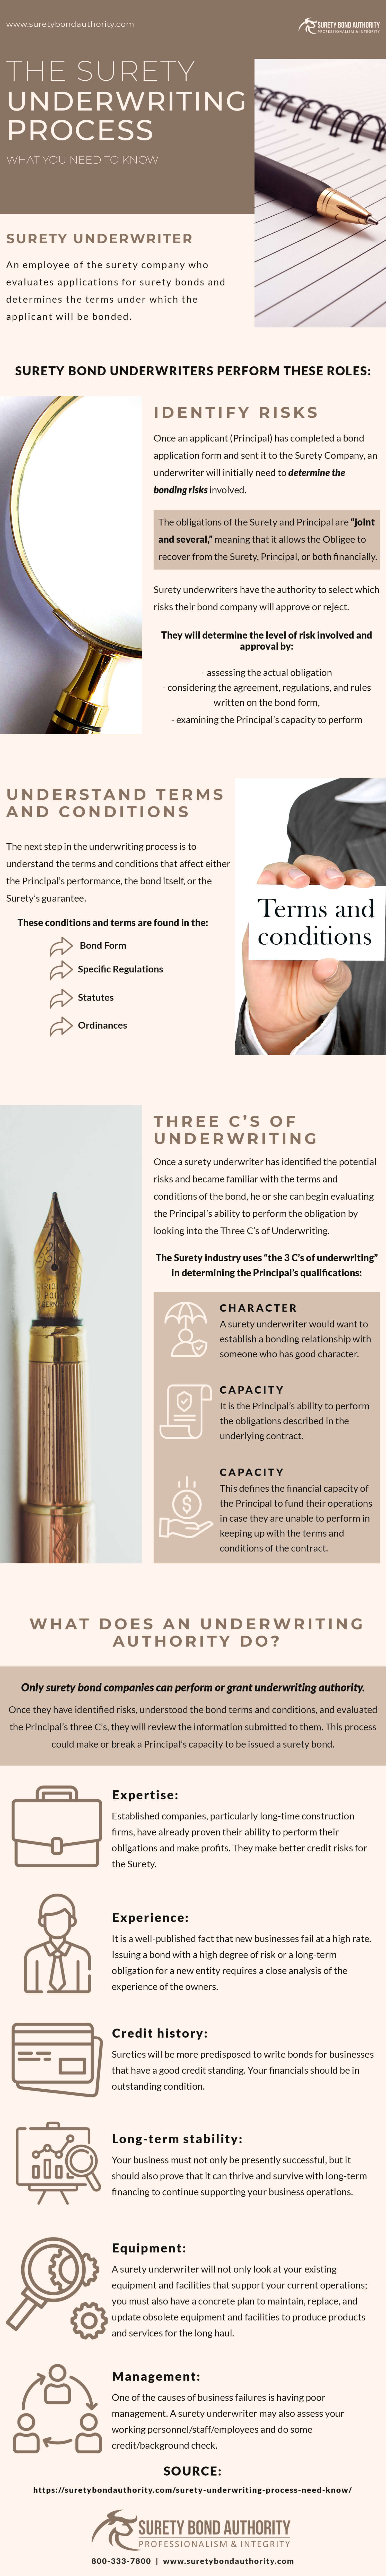 The Surety Underwriting Process Infographic